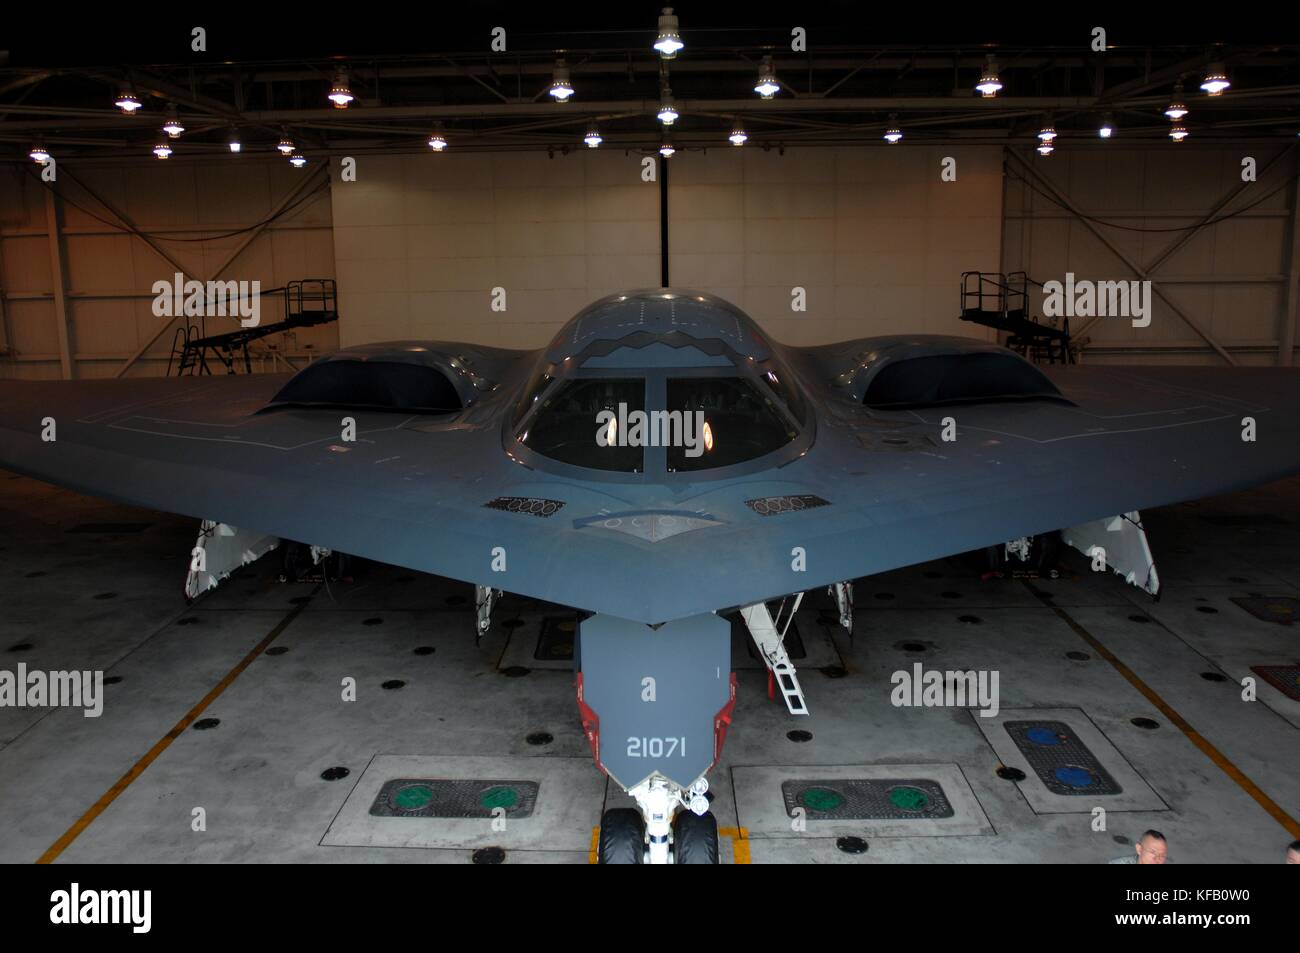 A U.S. Air Force B-2 Spirit stealth bomber aircraft sits in a hanger at the Whiteman Air Force Base October 30, 2009 near Knob Noster, Missouri.   (photo by Kenny Holston via Planetpix) Stock Photo